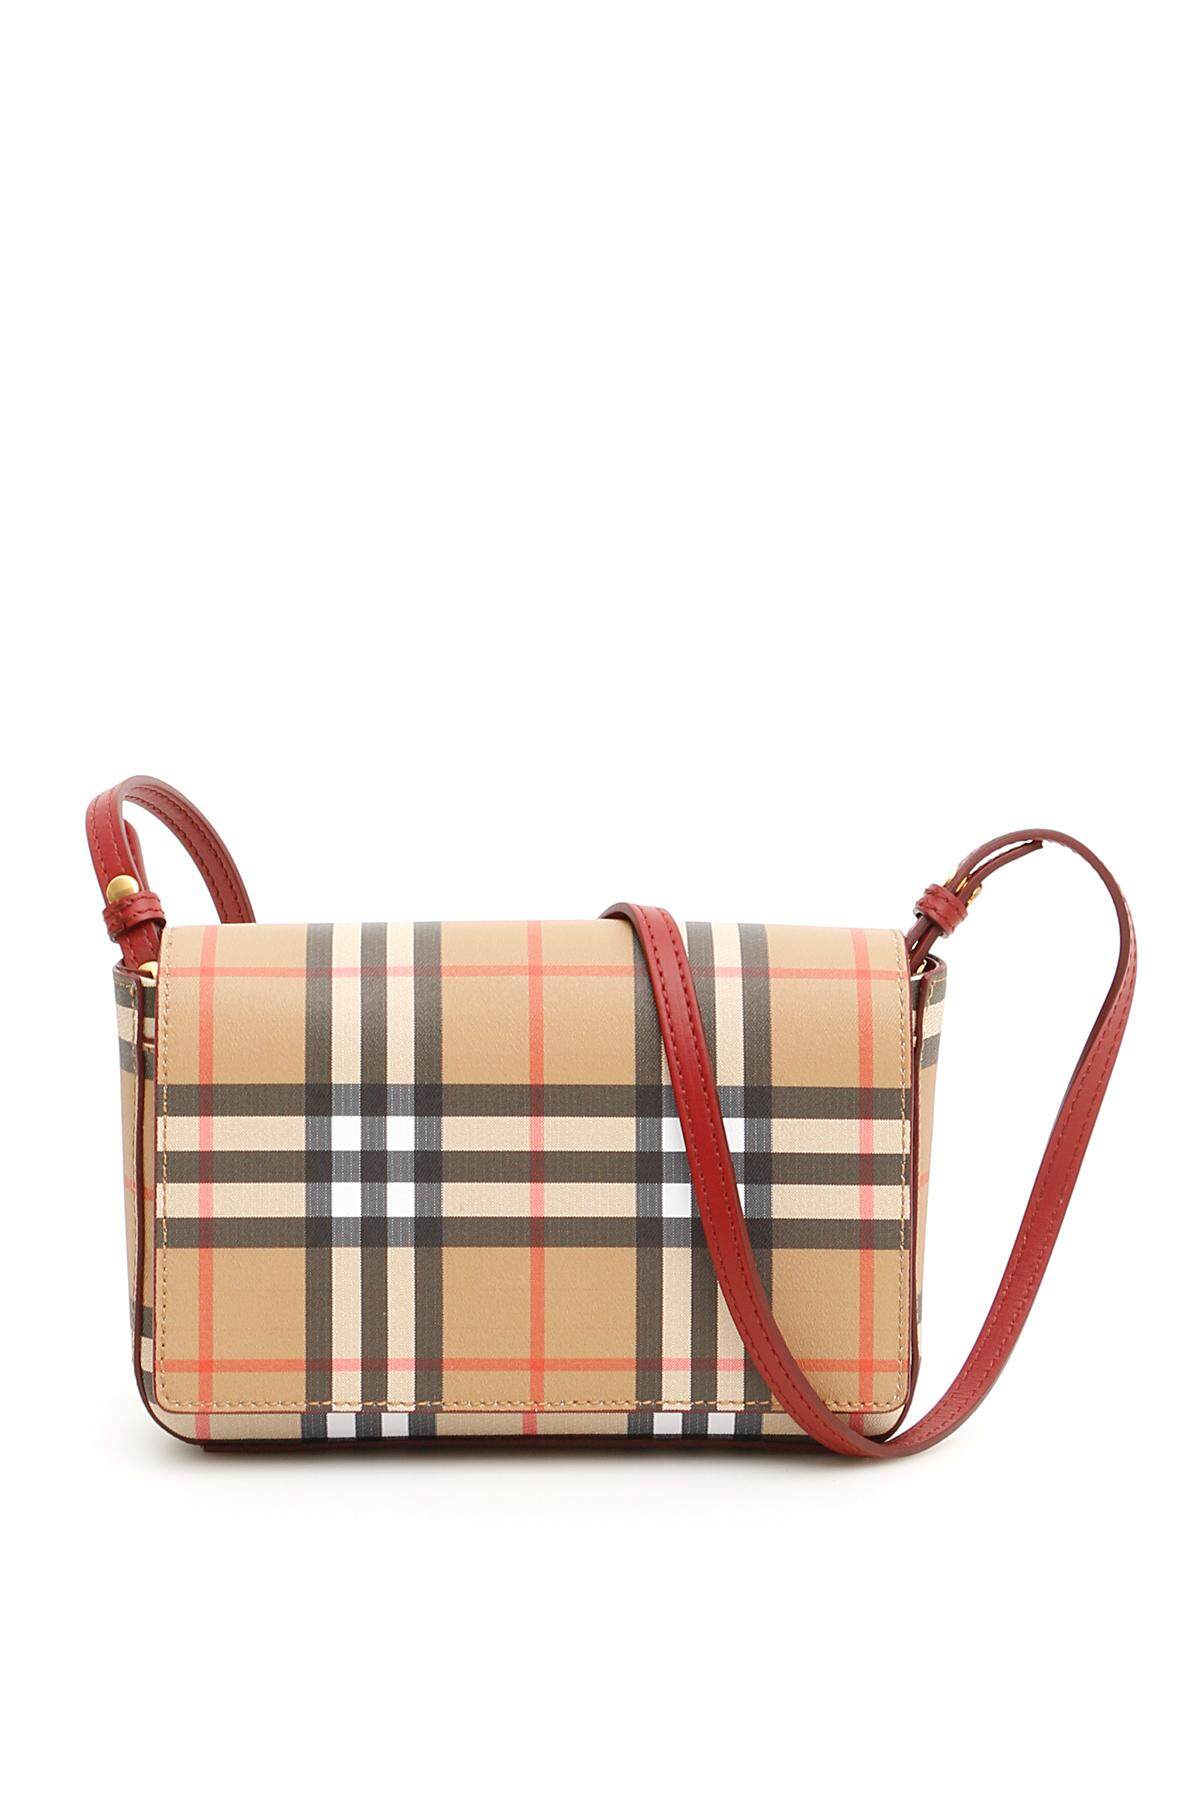 Burberry Bags 2018 Prices | IUCN Water